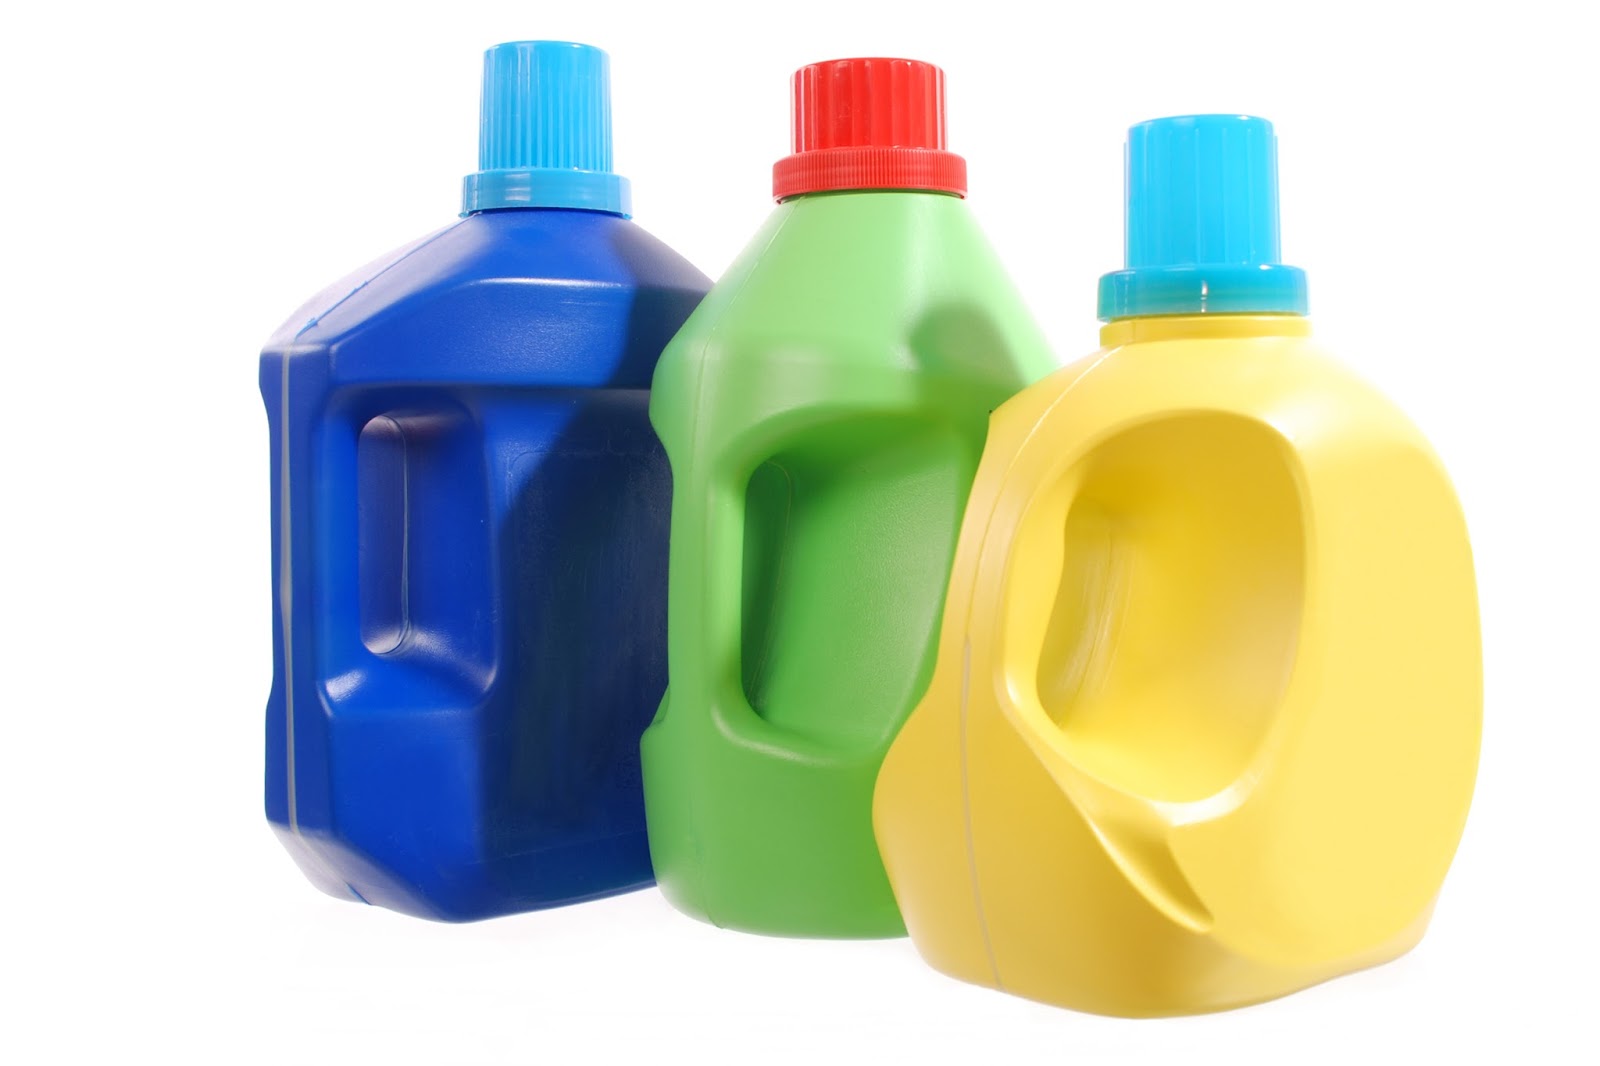 Are Laundry Detergent Bottles Recyclable?